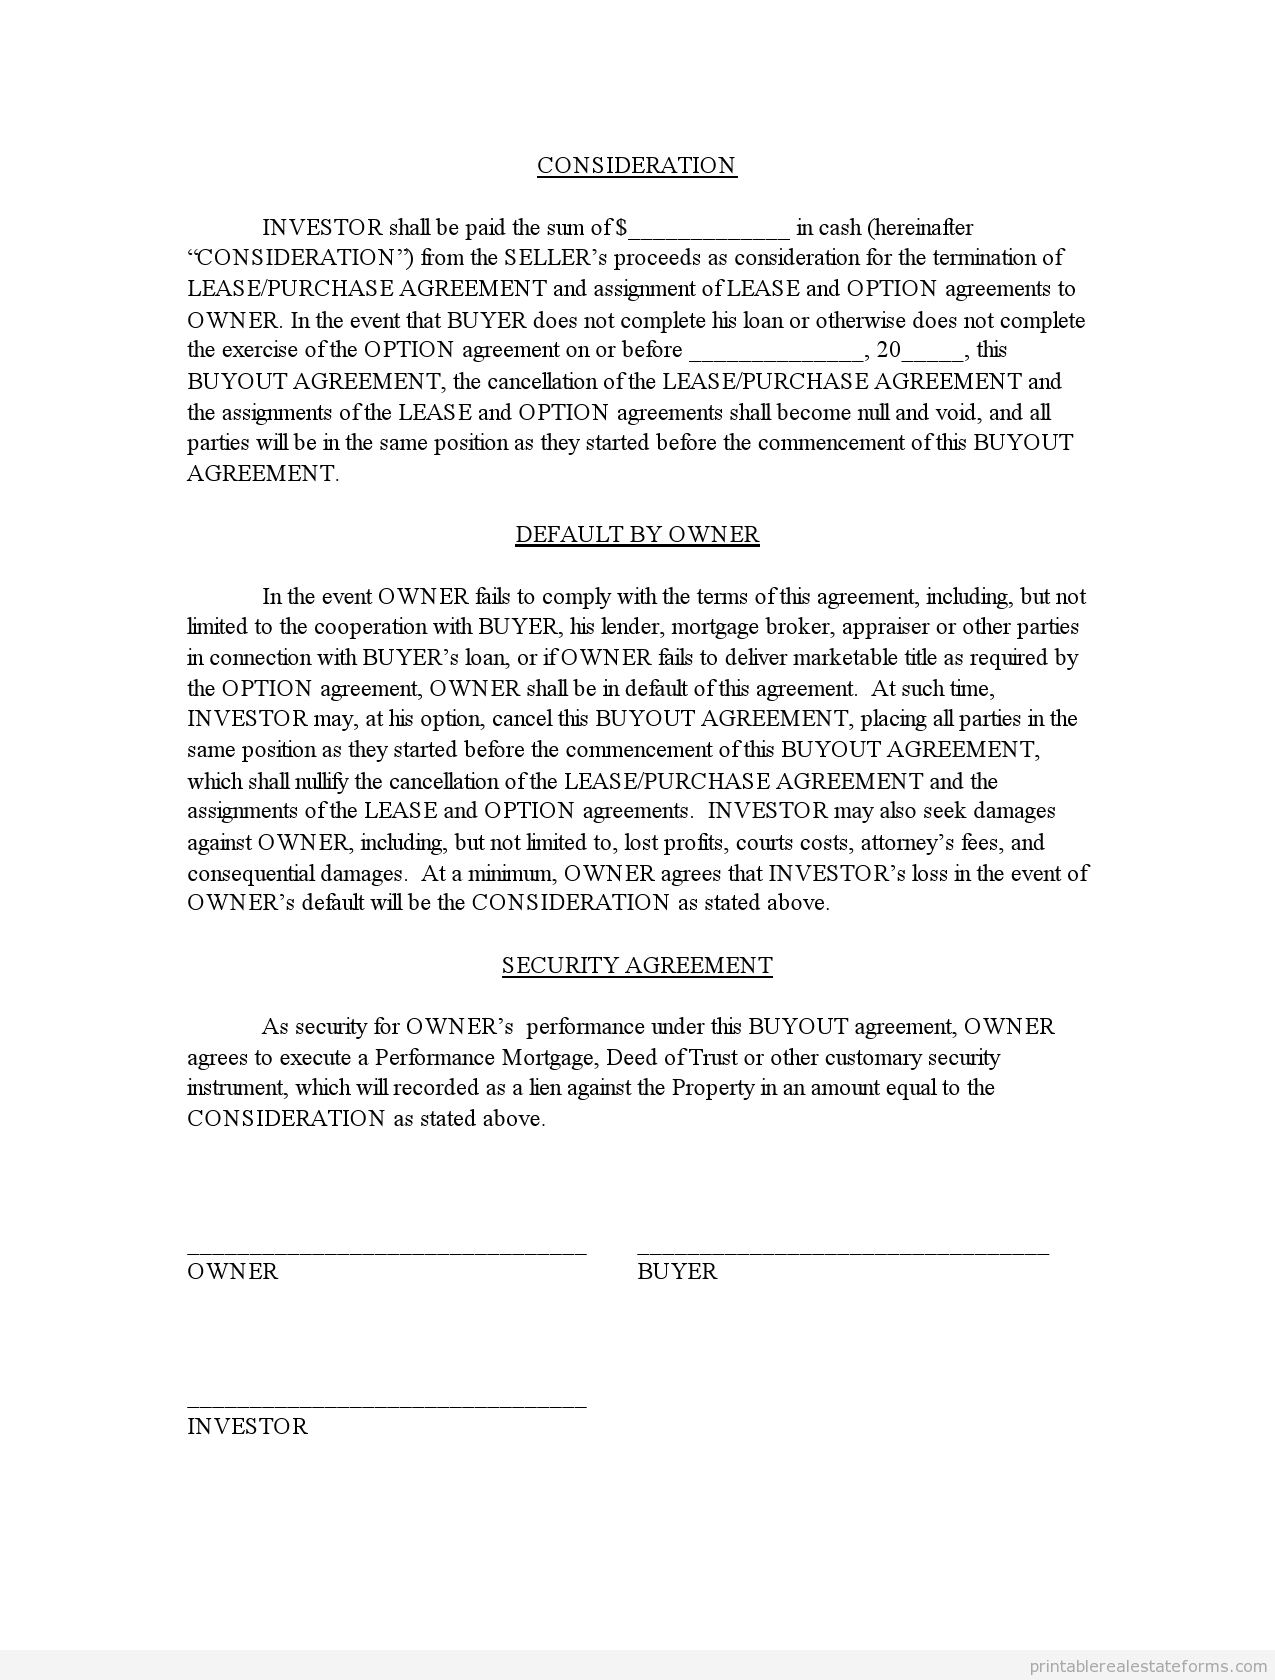 FREE Buyout Agreement FORM Printable Real Estate Forms Real Estate 